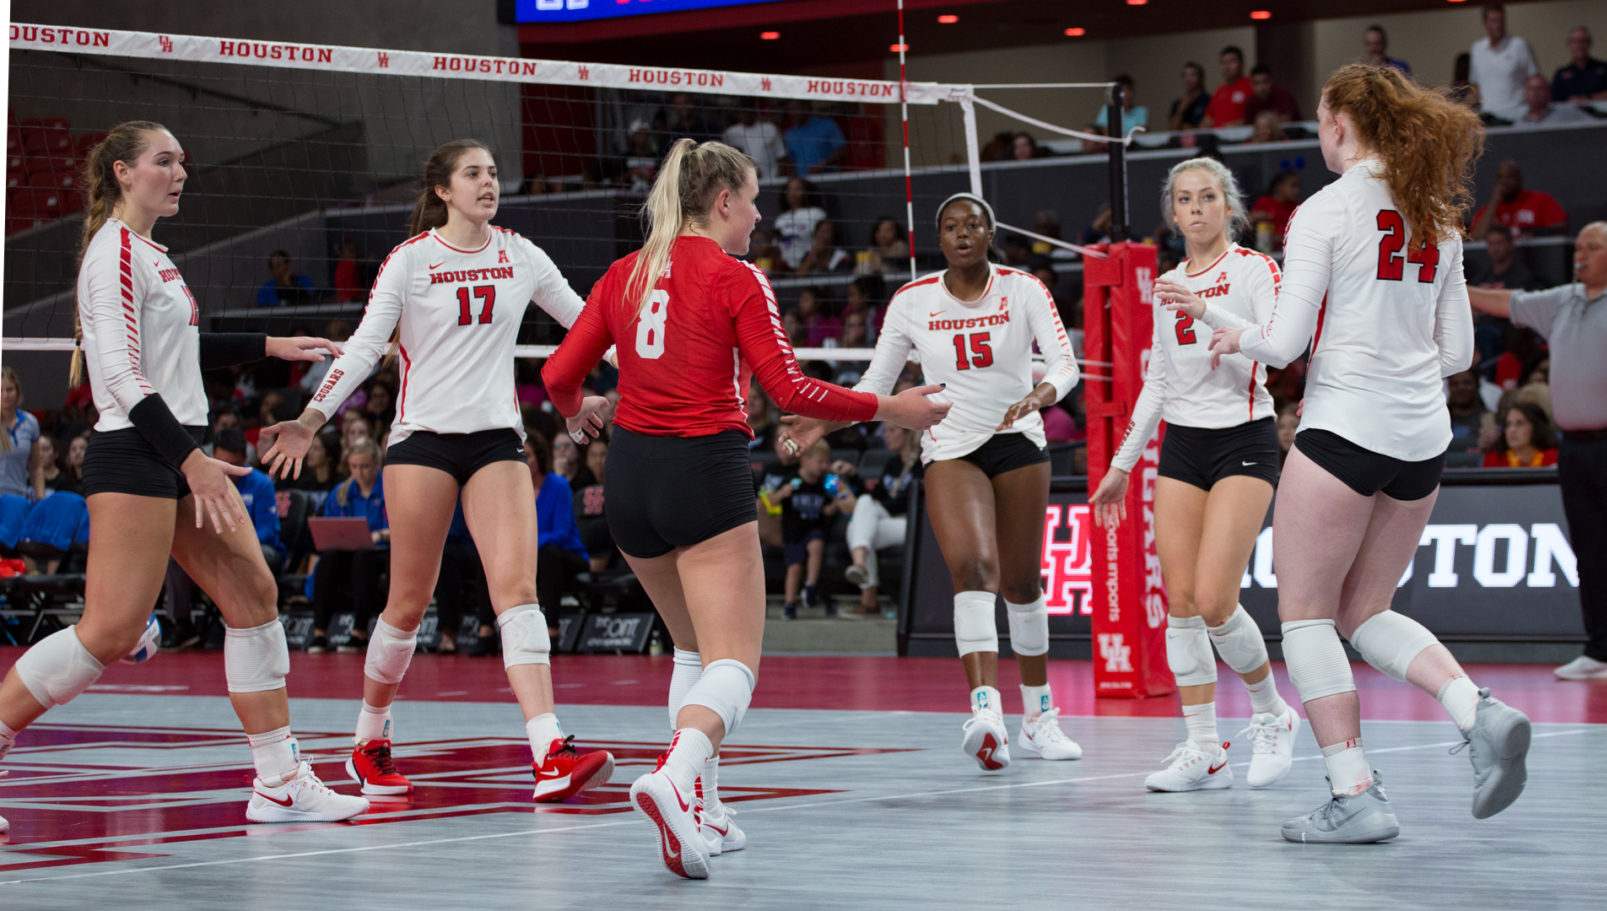 For the first time in almost two decades, the Cougars are heading to a postseason tournament. Houston will face Sam Houston State for their first matchup in the National Invitational Volleyball Tournament on Thursday in Dallas. | Trevor Nolley/The Cougar